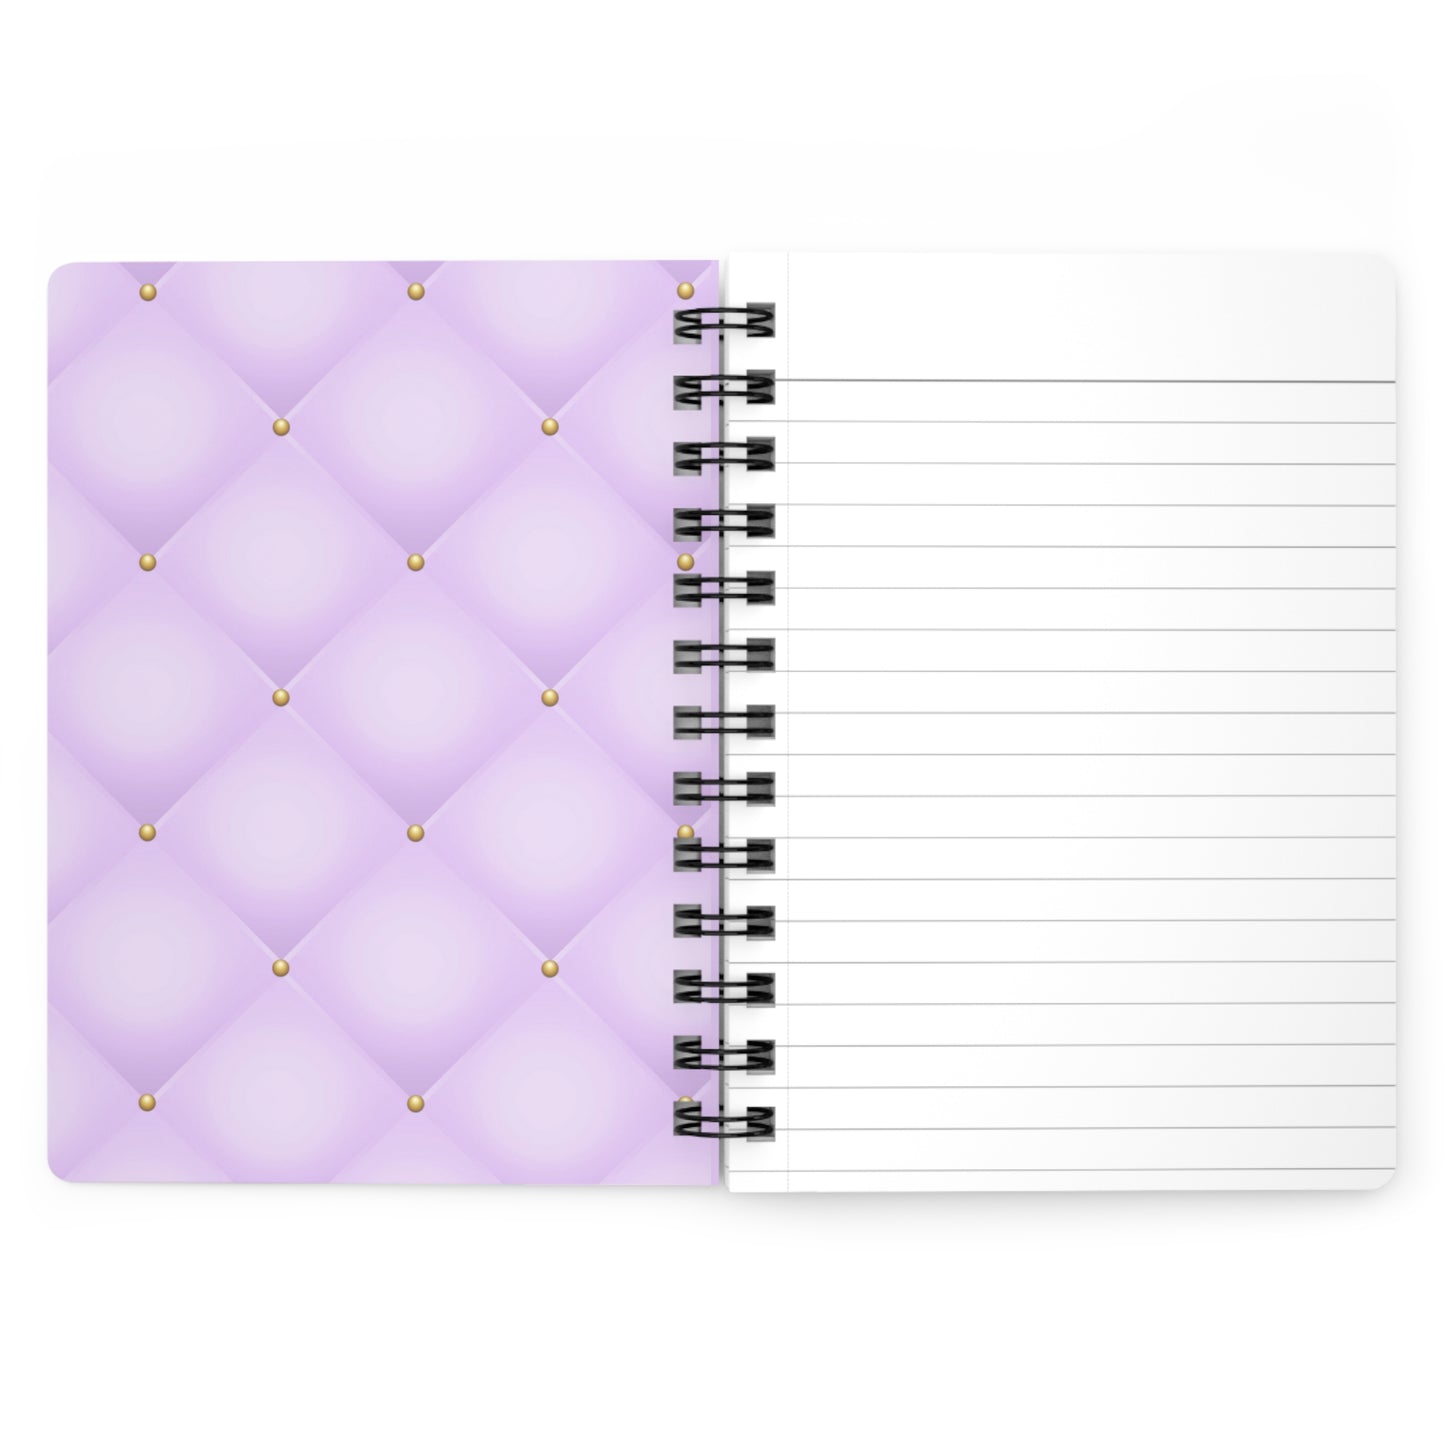 Stop for one minute Tufted Print Light Grayish Violet and Gold Spiral Bound Journal